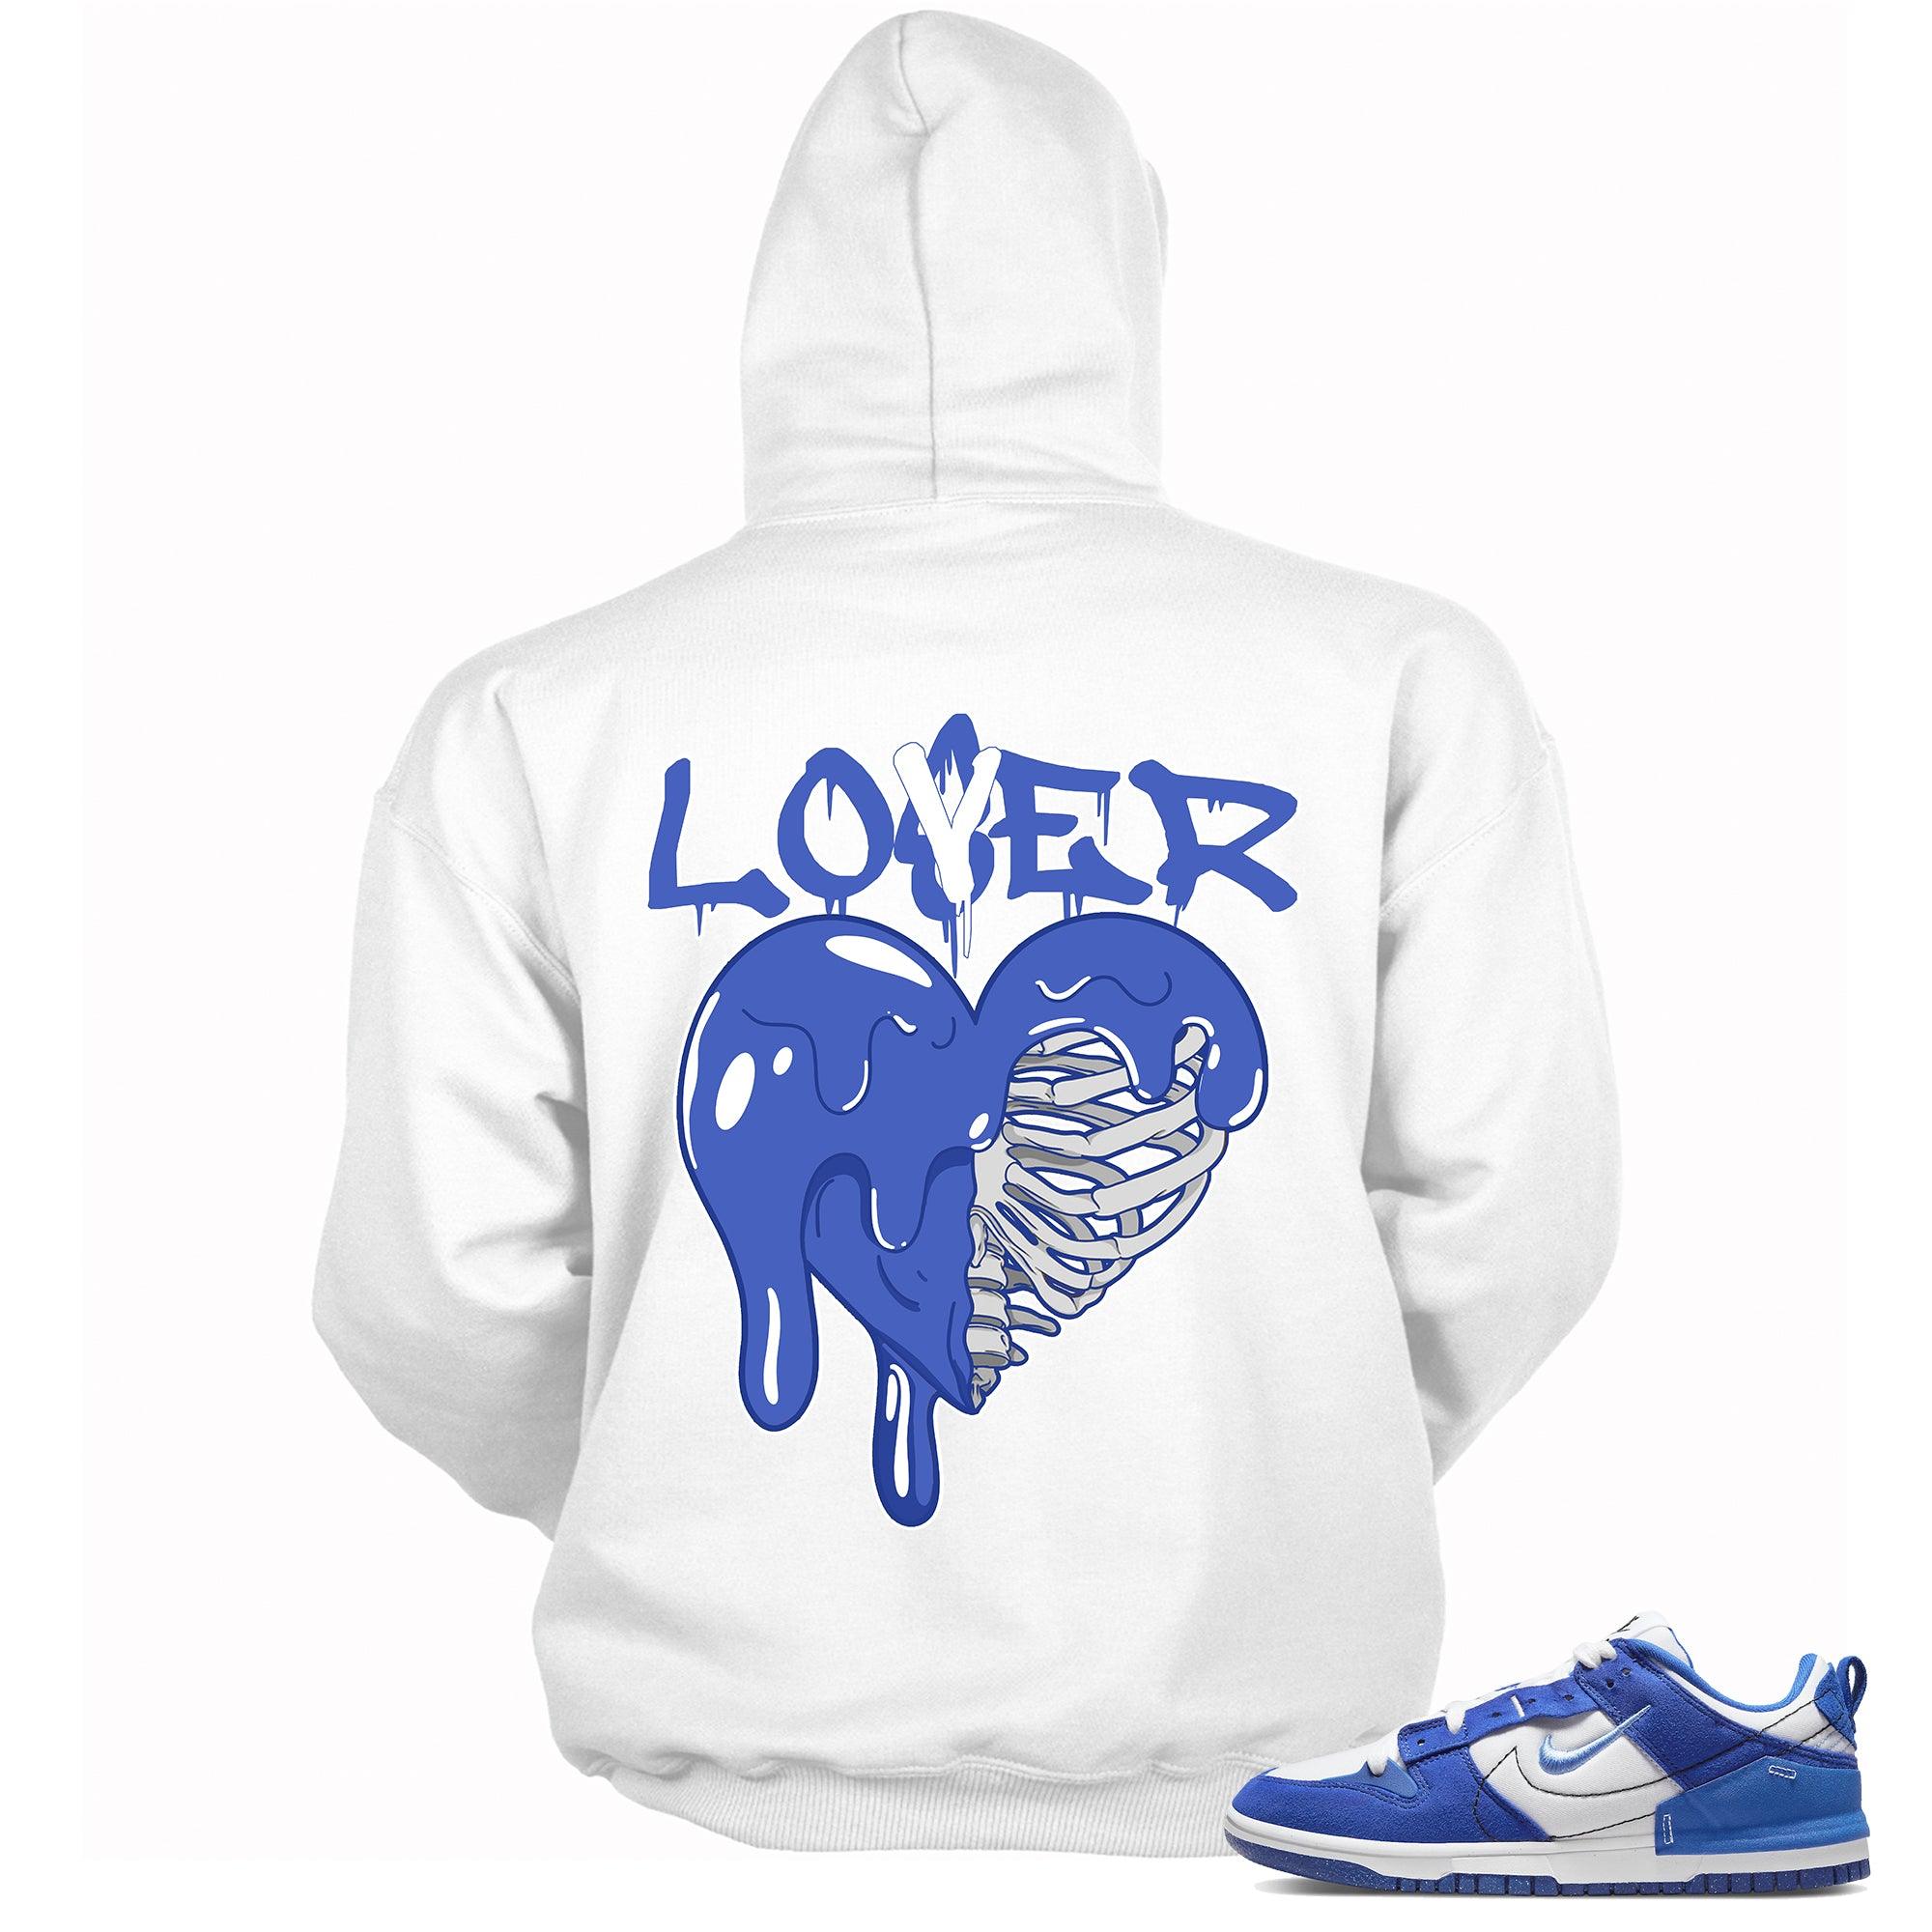 Cool White Graphic Hoodie with “ Lover Loser “ print, that perfectly matches Nike Dunk Disrupt 2 Hyper Royal sneakers